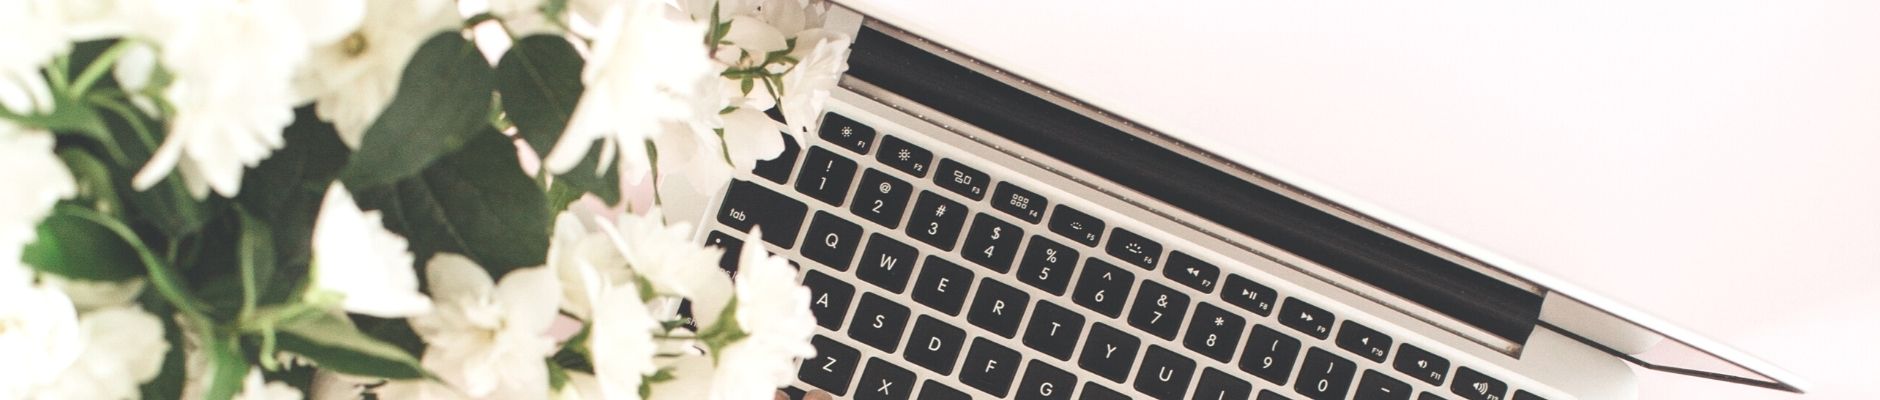 Close up image of a laptop and white flowers